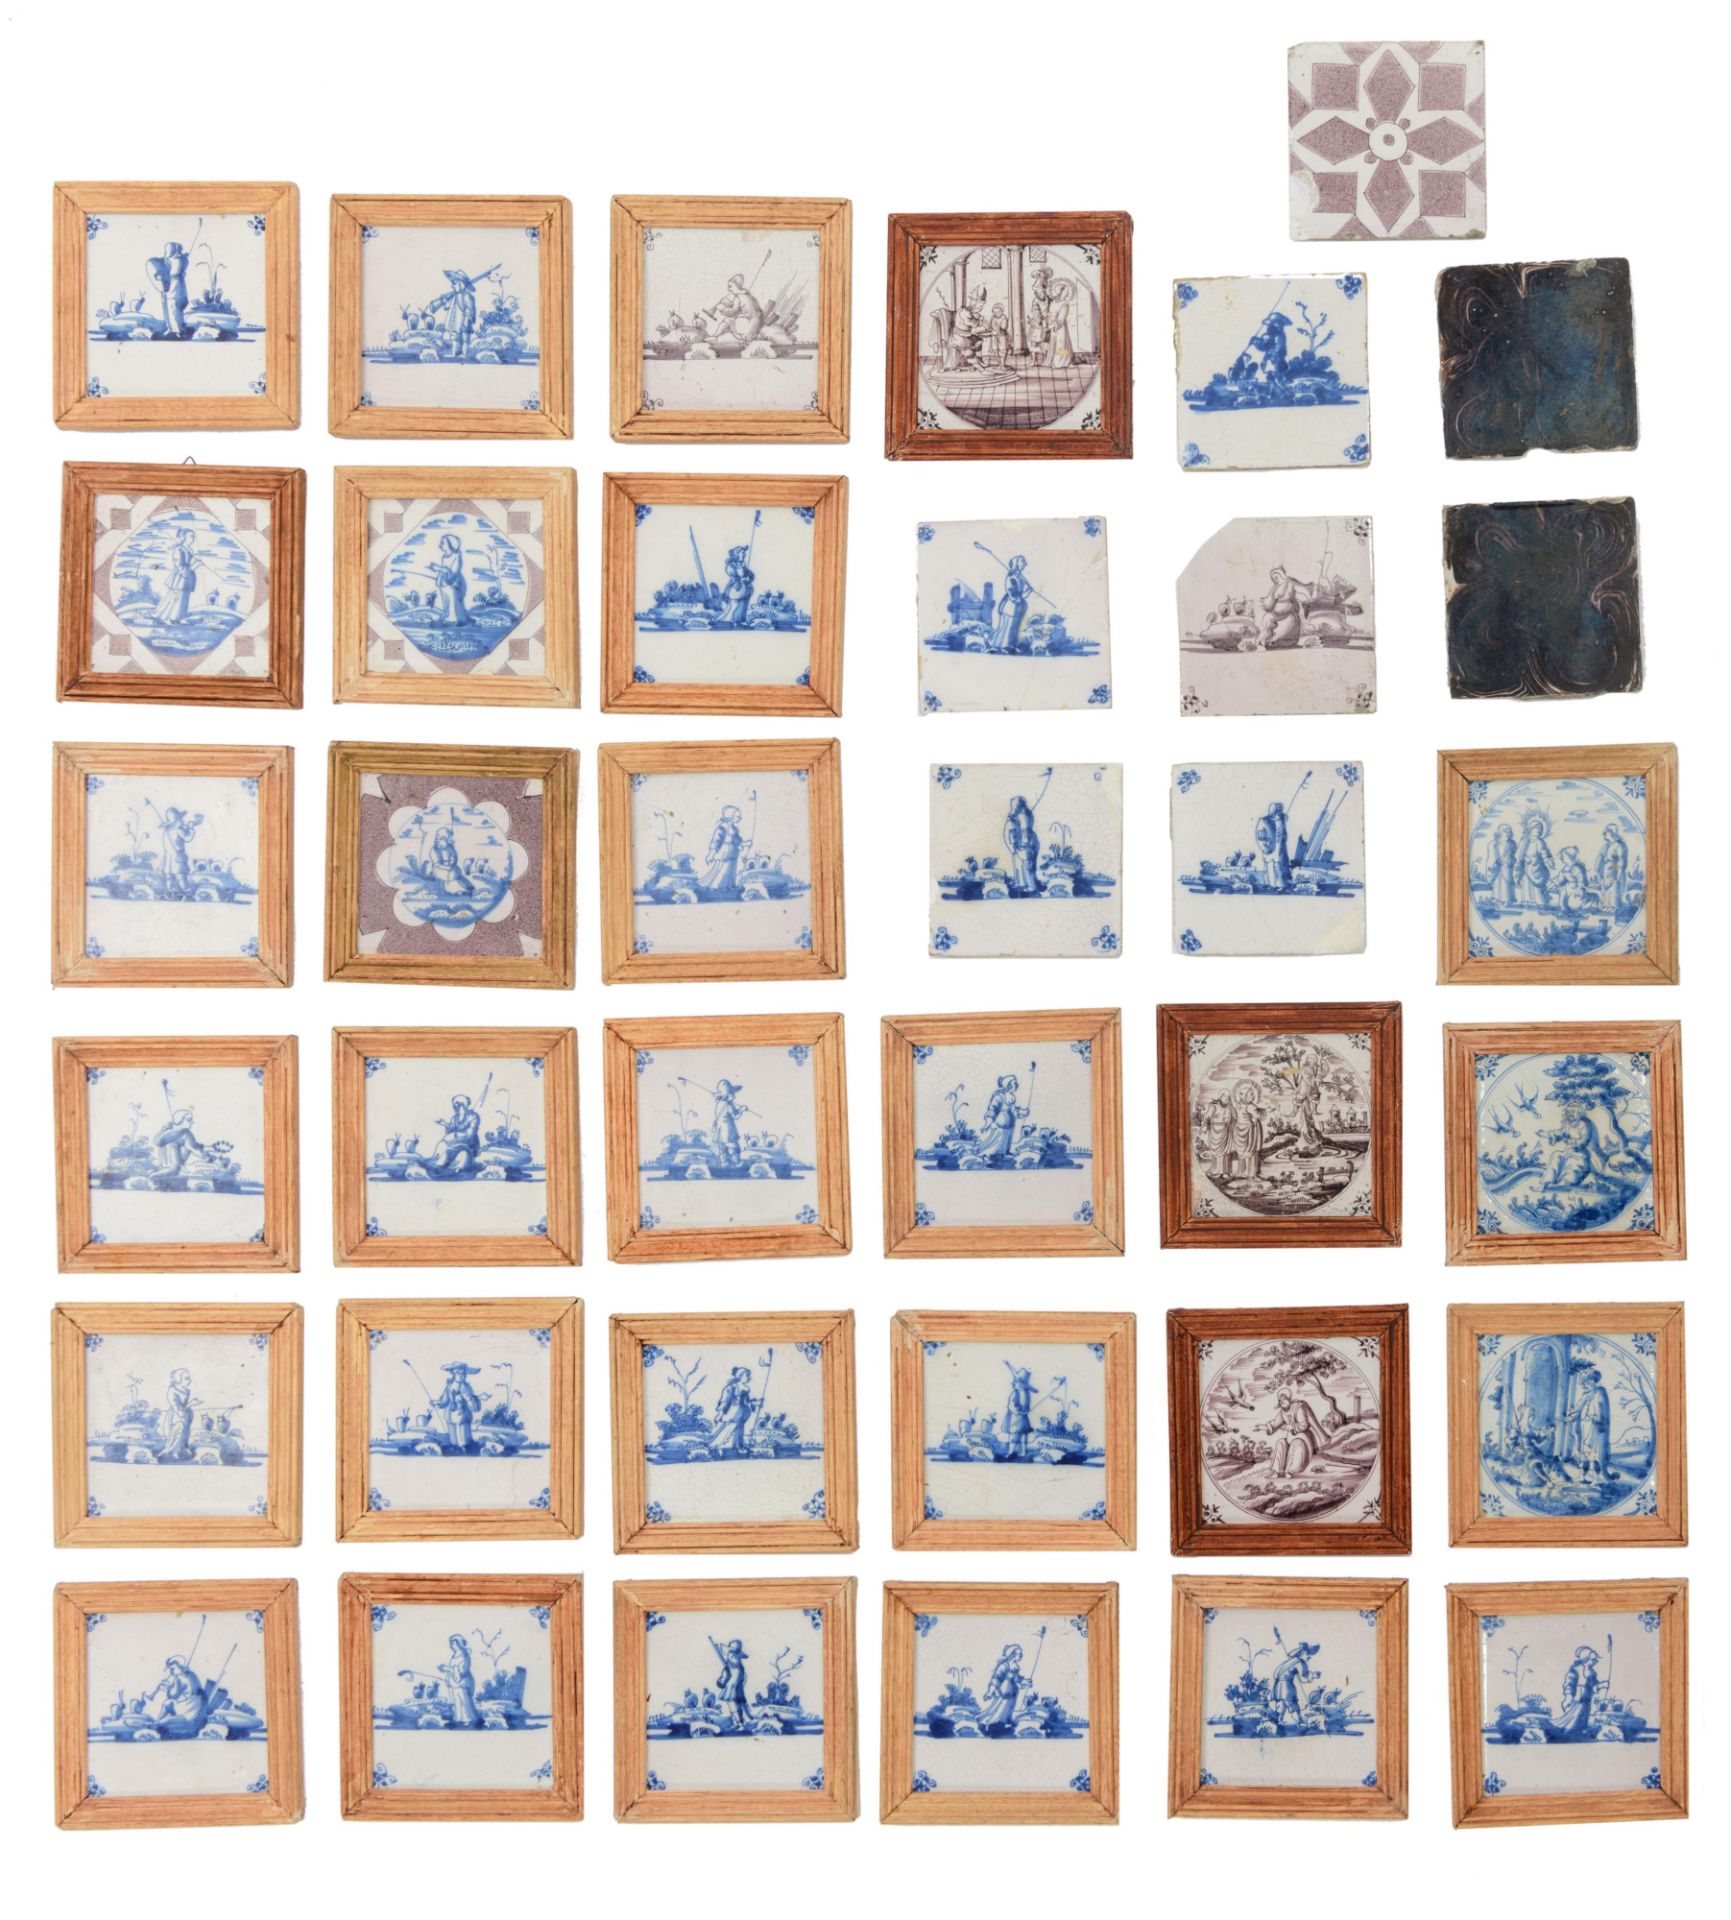 A large collection of 25 blue and white and manganese decorated Dutch Delftware tiles, depicting sev